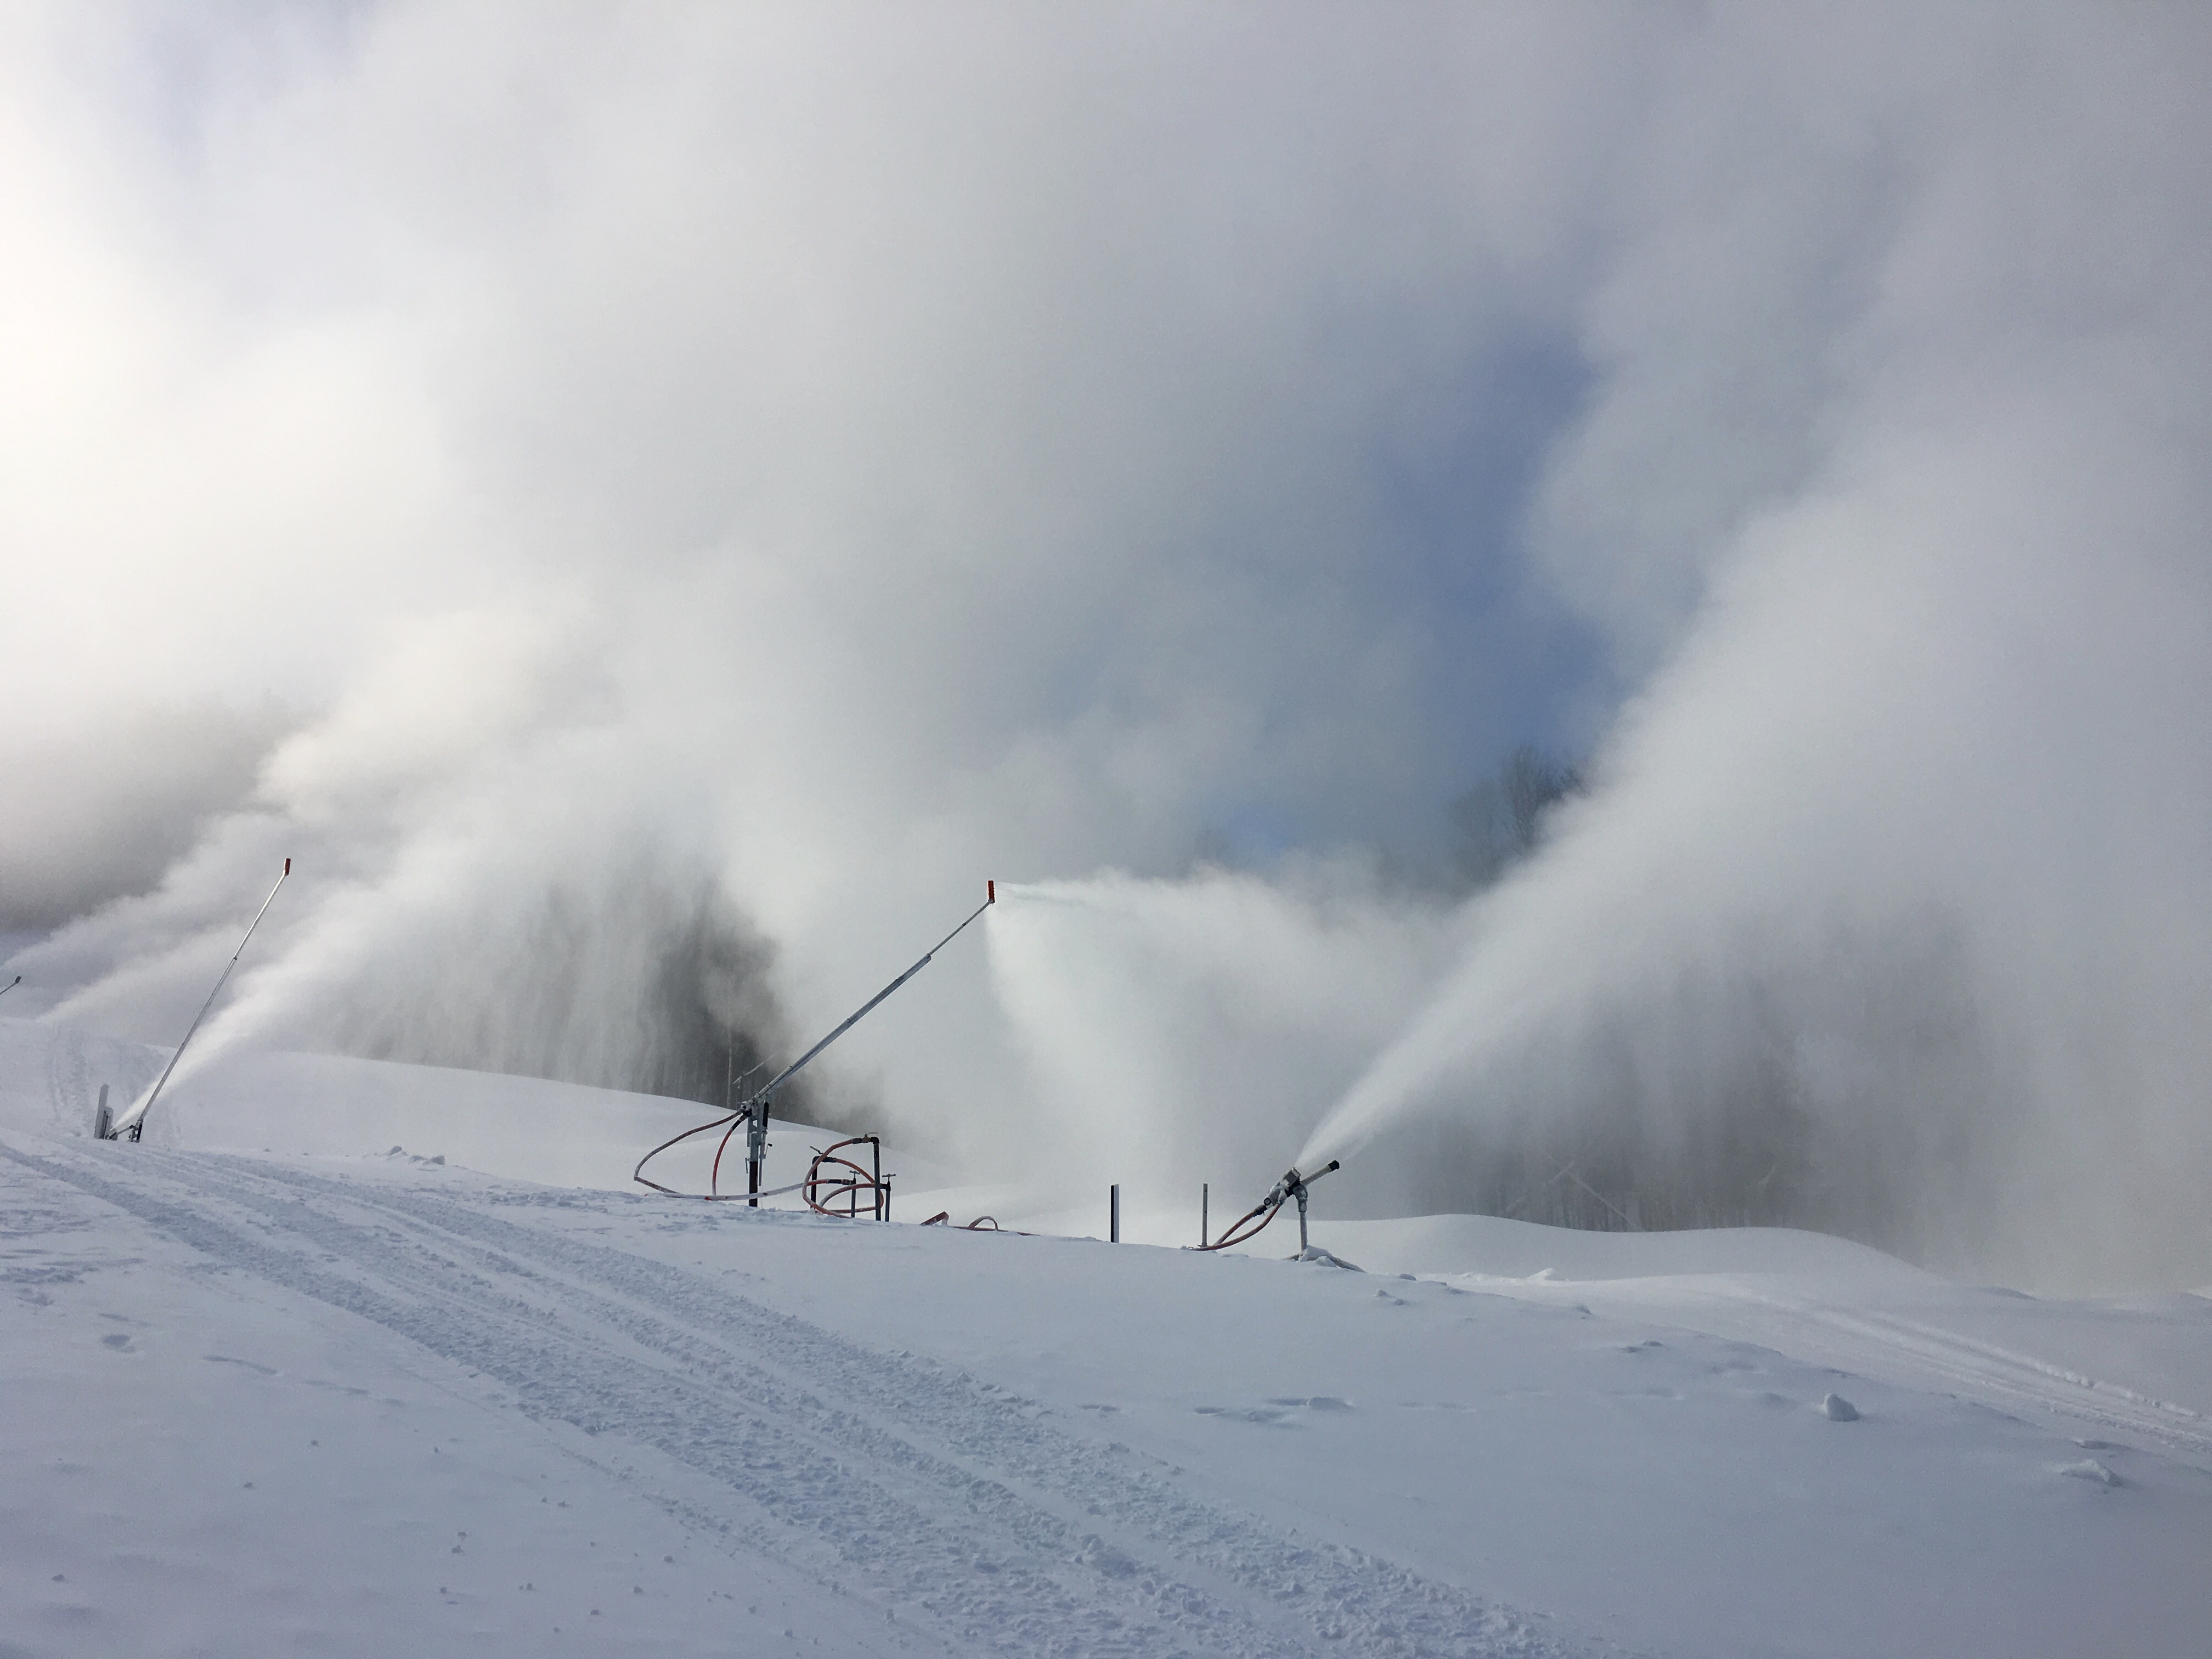 Snowmaking on Practice Slope